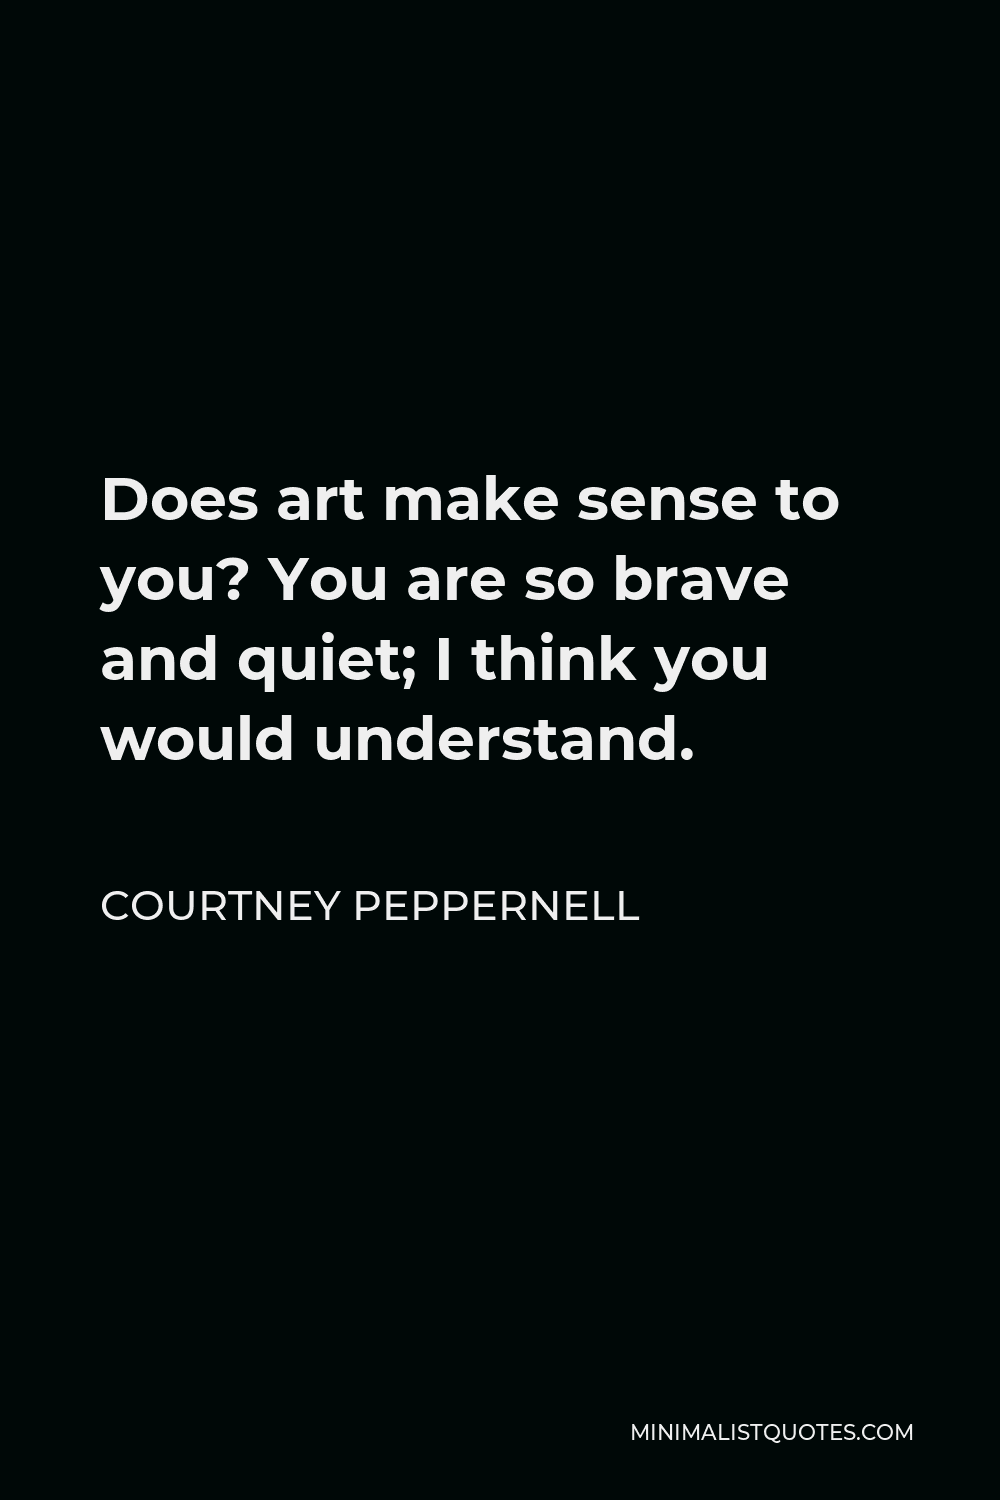 Courtney Peppernell Quote - Does art make sense to you? You are so brave and quiet; I think you would understand.